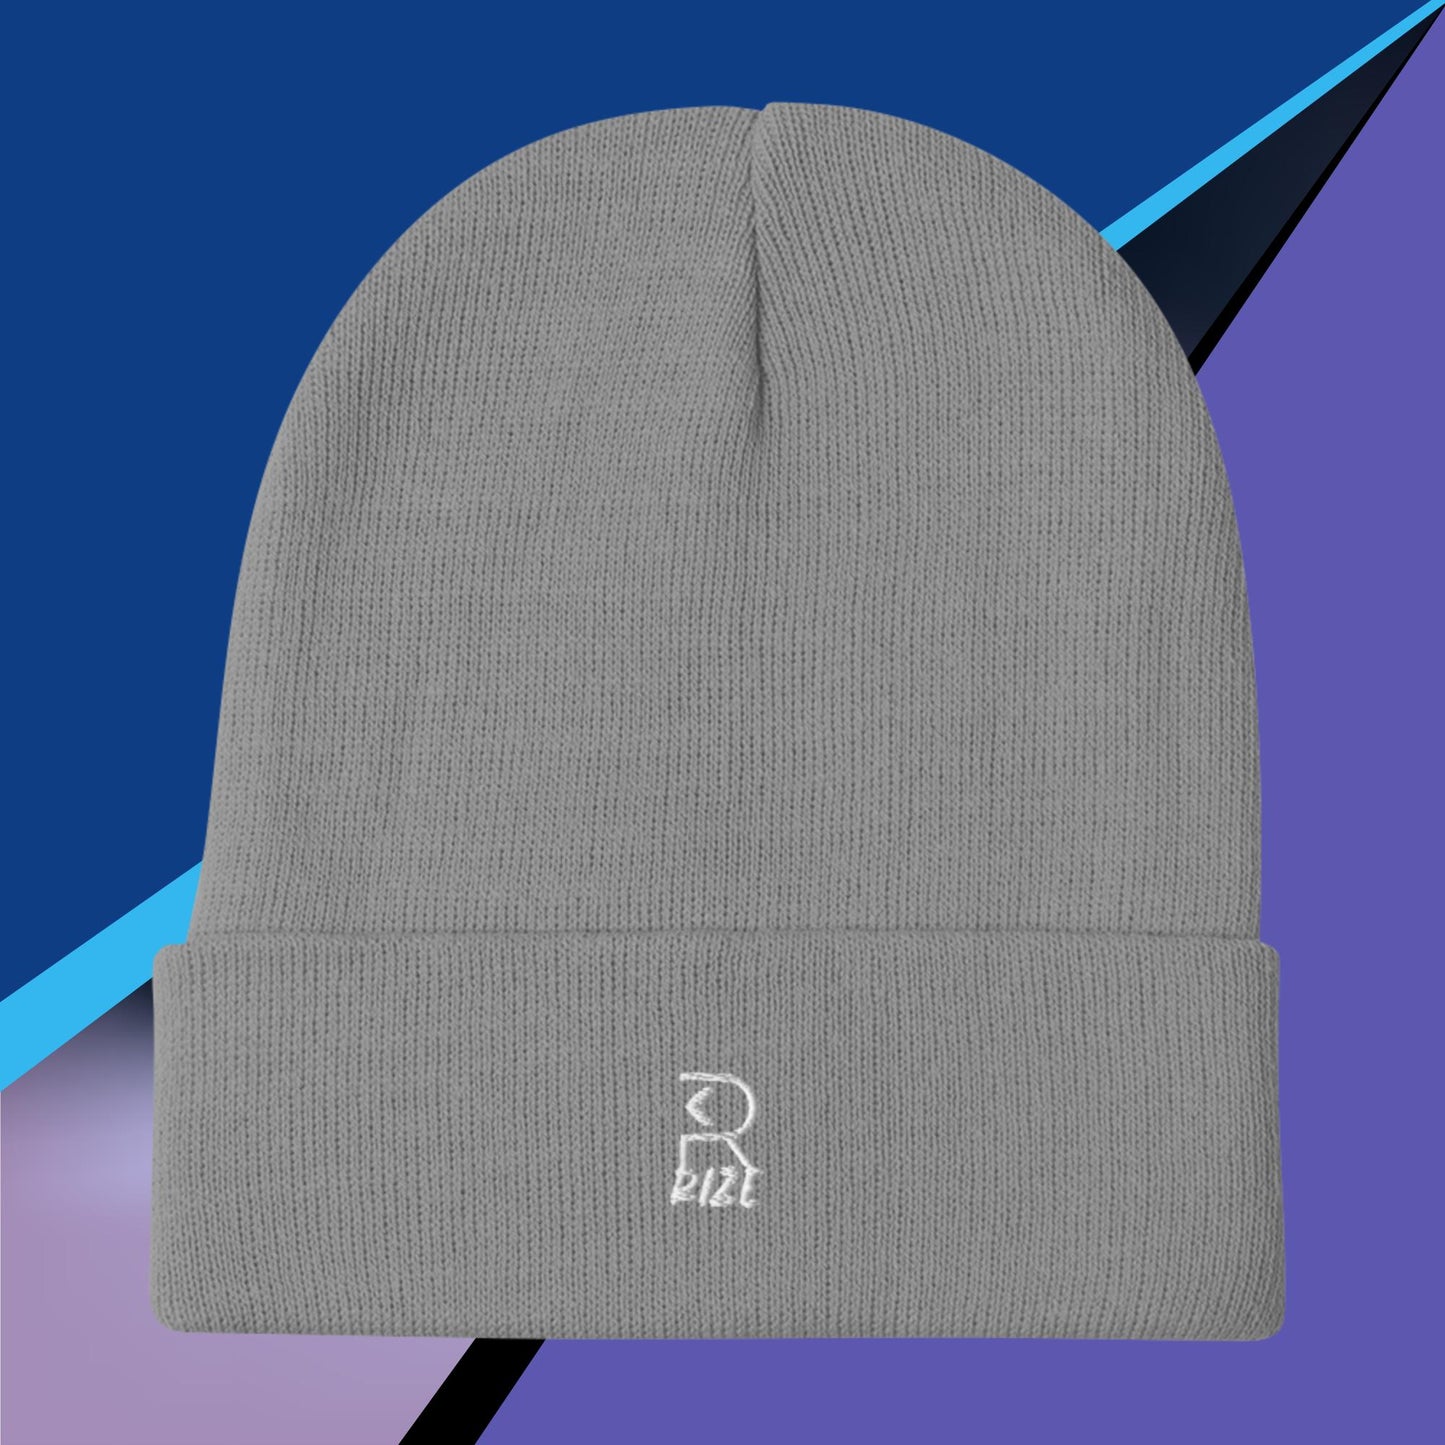 Rize Embroidered Beanie